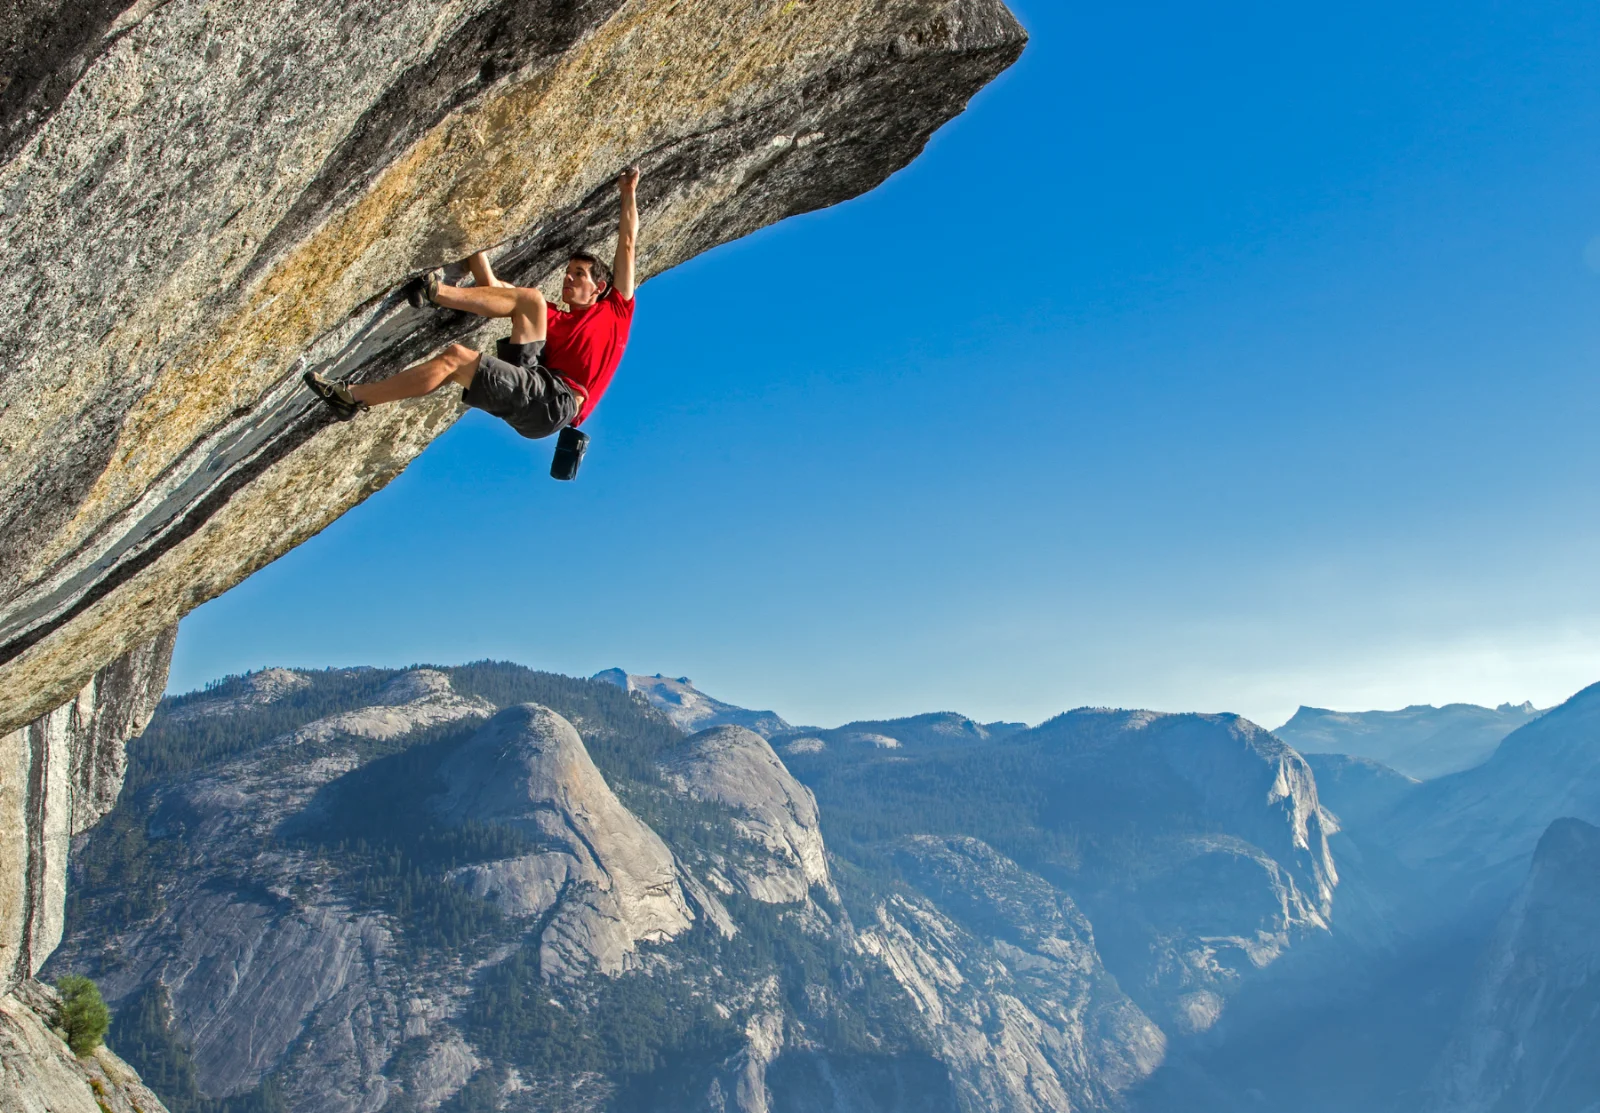 Free Solo | The first man who climbed El Cap without ropes